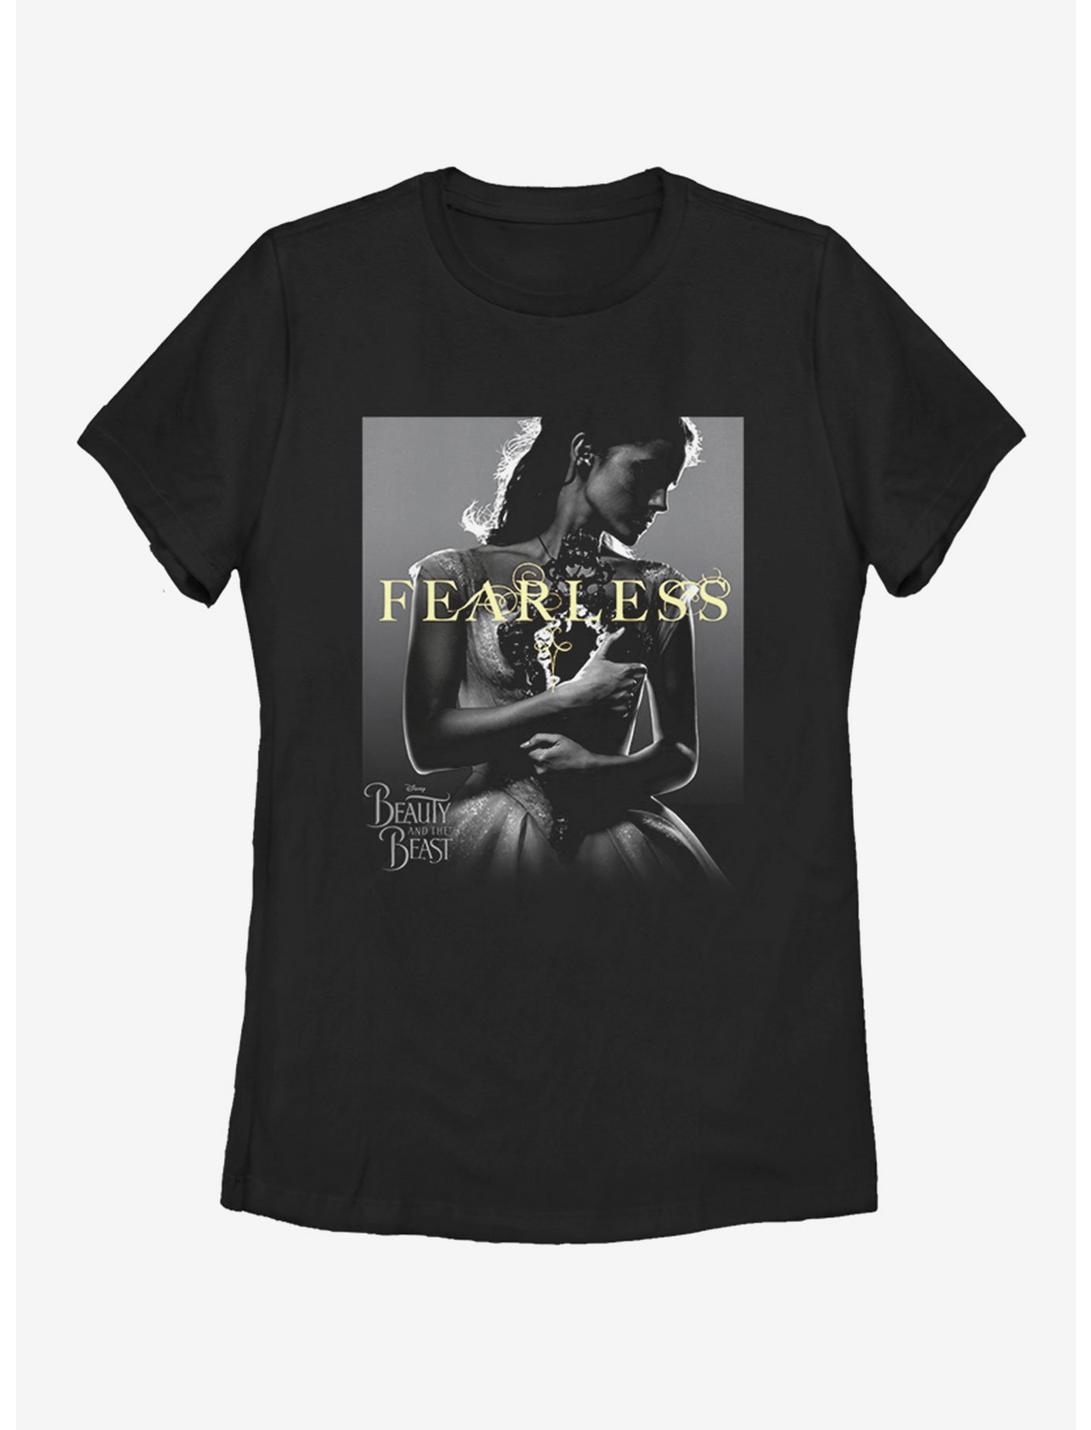 Disney Beauty and The Beast Fearless Womens T-Shirt, BLACK, hi-res